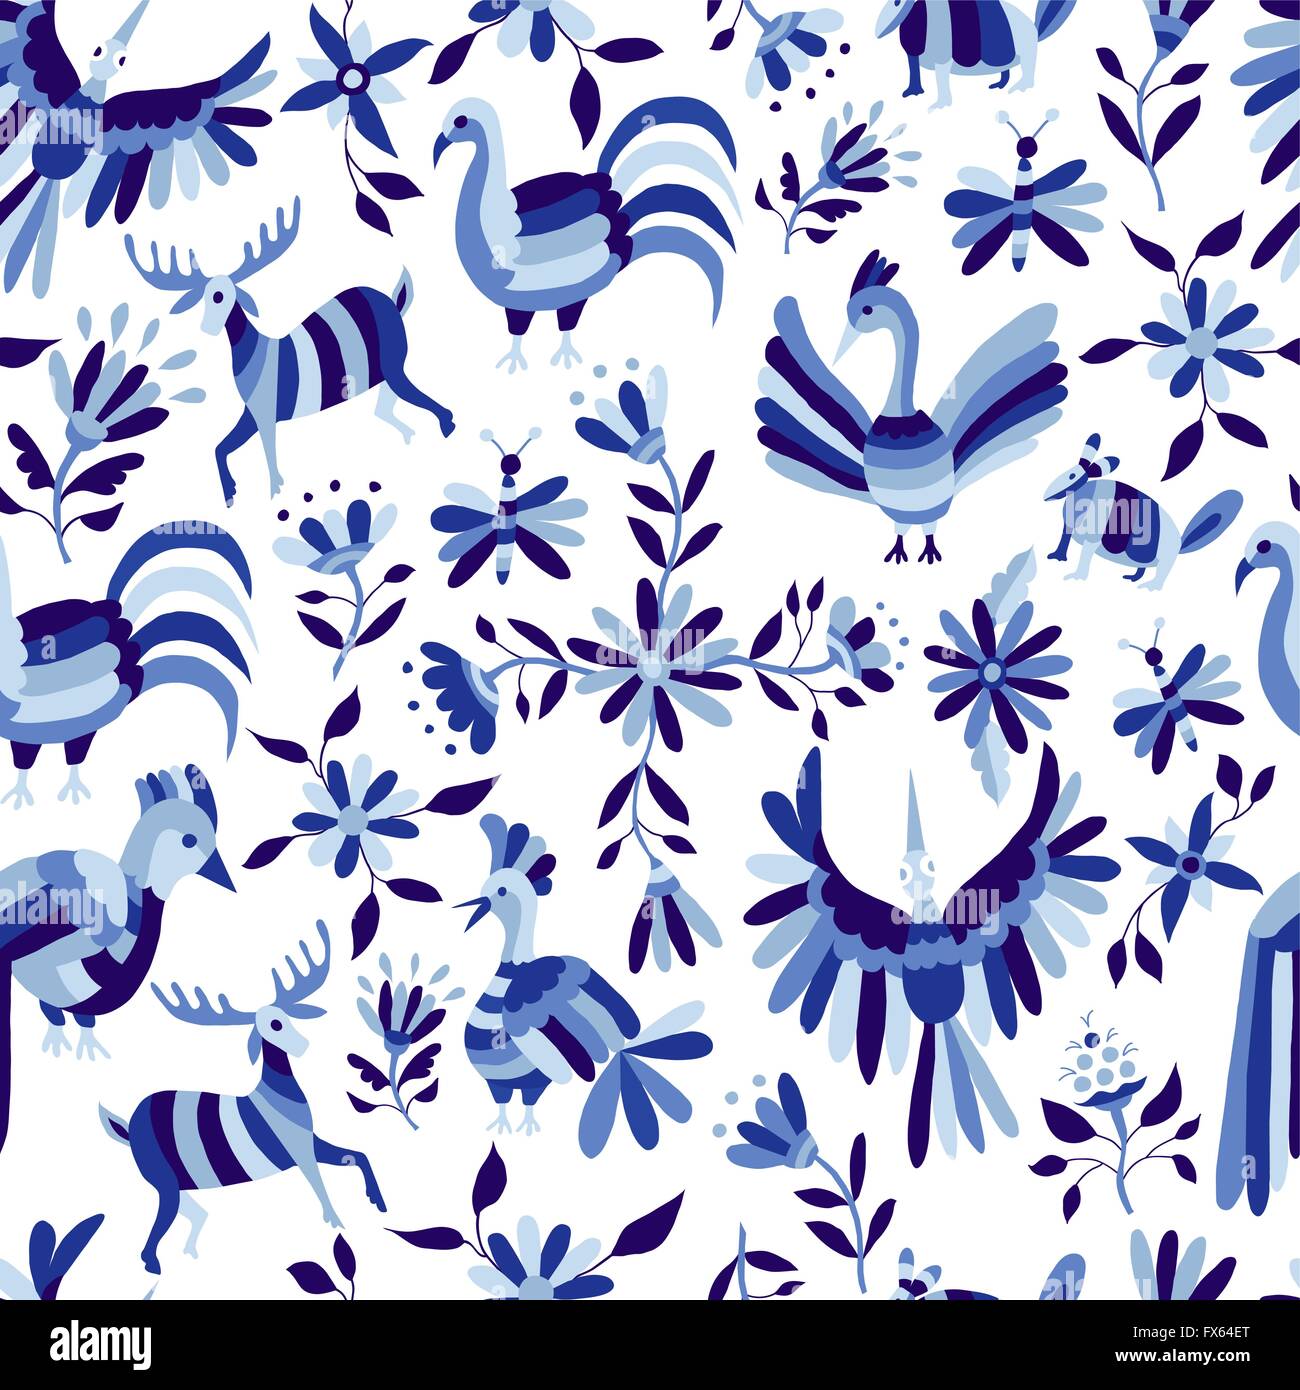 Vintage style nature seamless pattern, animals and flowers design in indigo blue color. EPS10 vector. Stock Vector